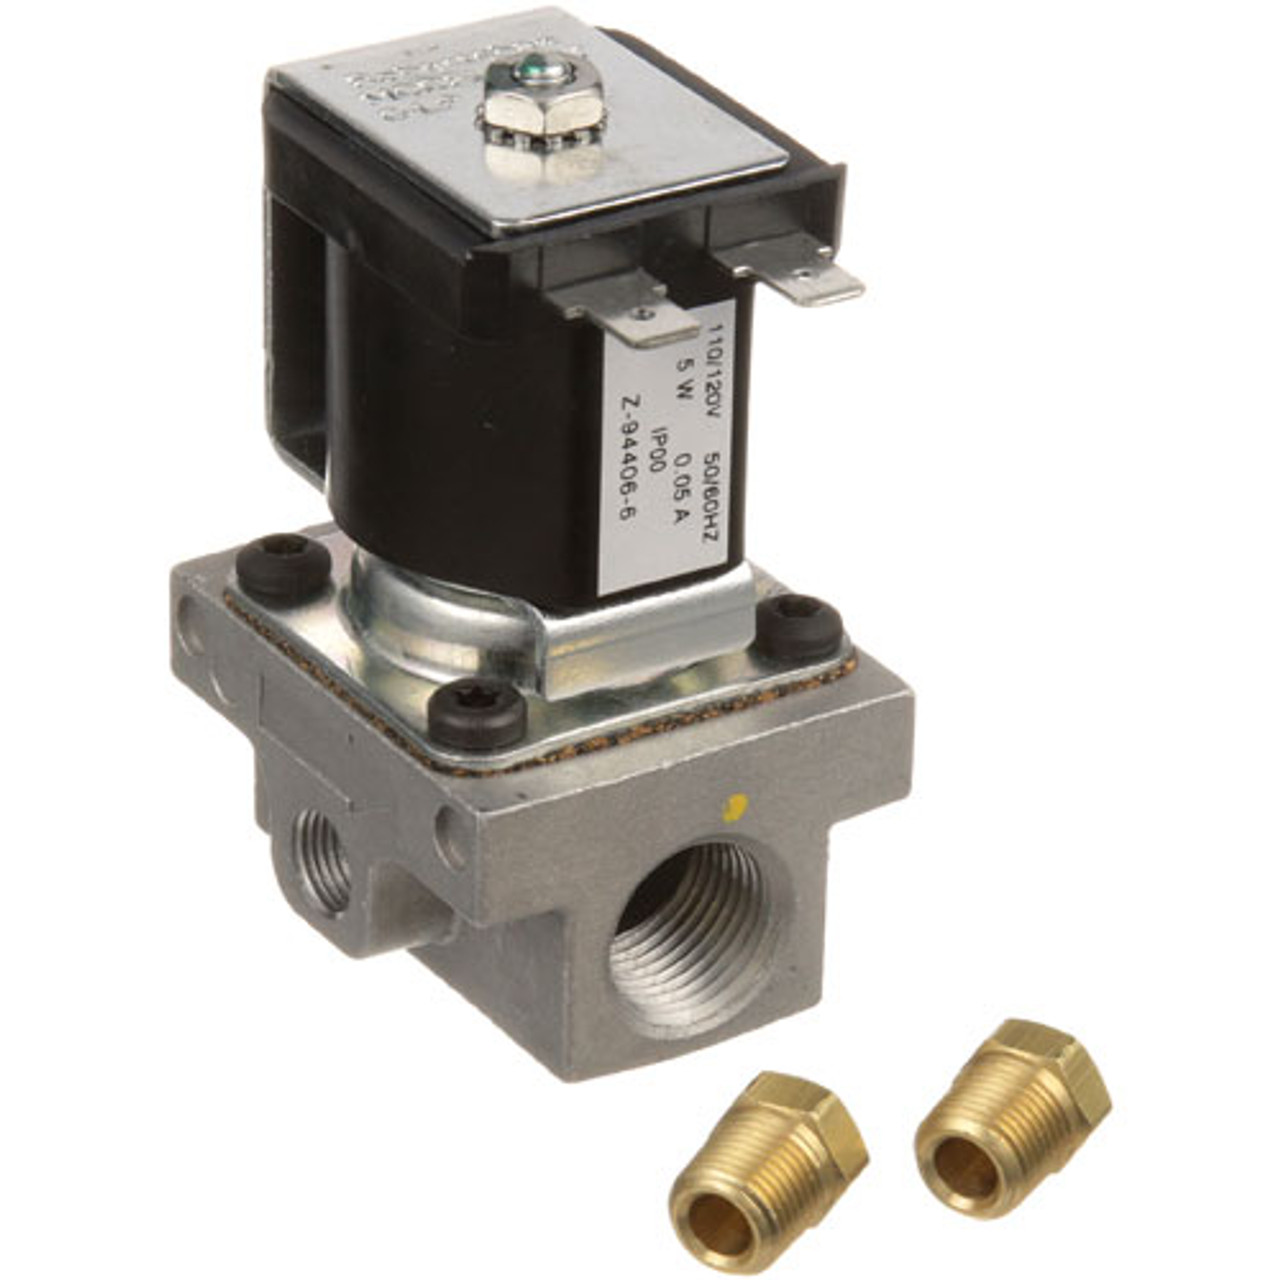 Gas Solenoid Valve - Replacement Part For Garland G02965-3